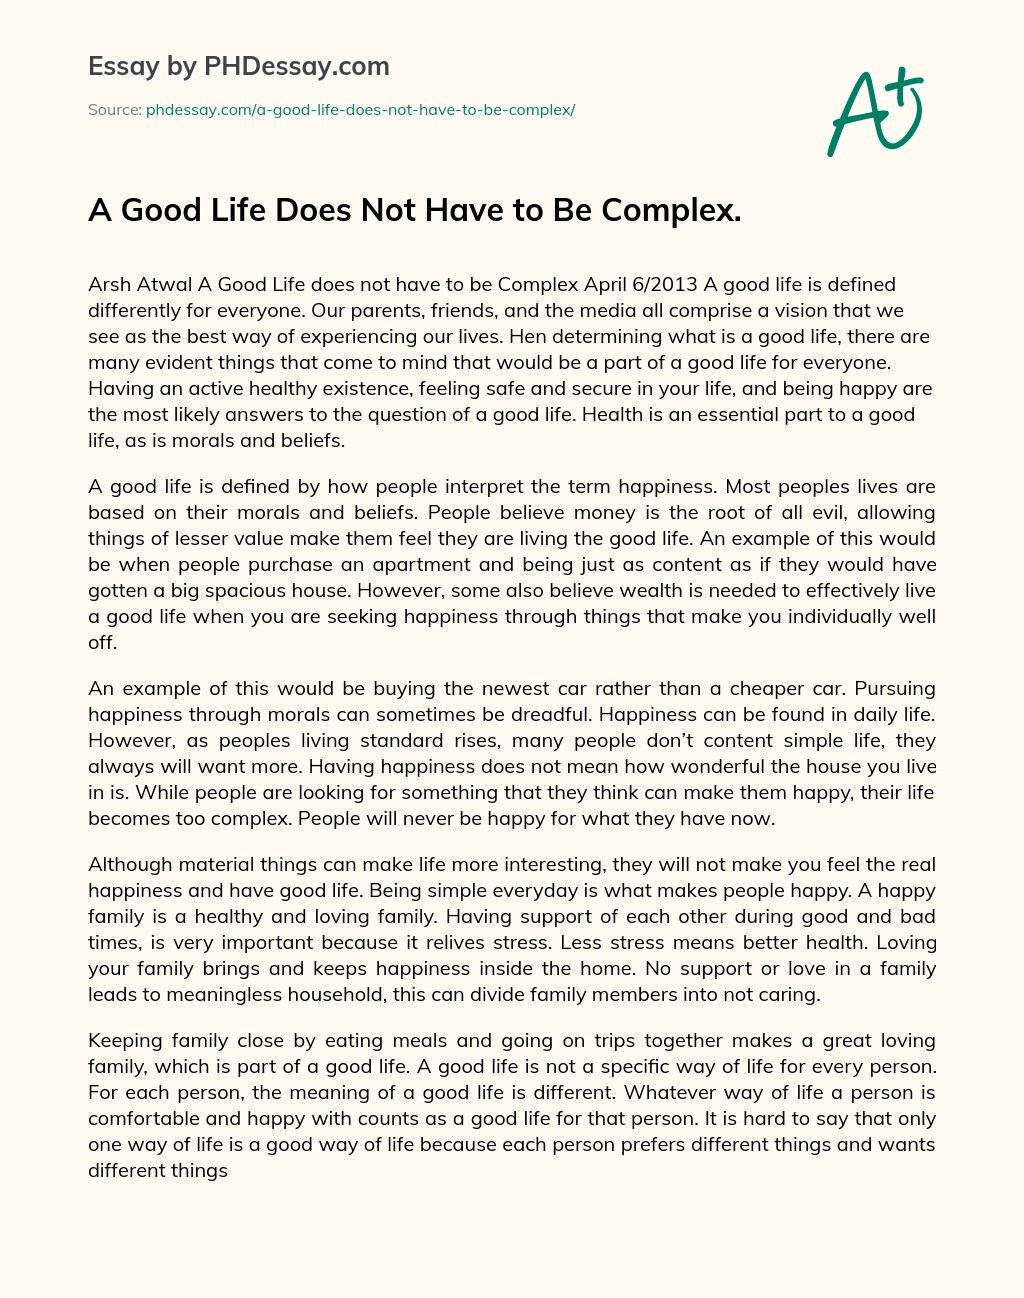 A Good Life Does Not Have to Be Complex. essay